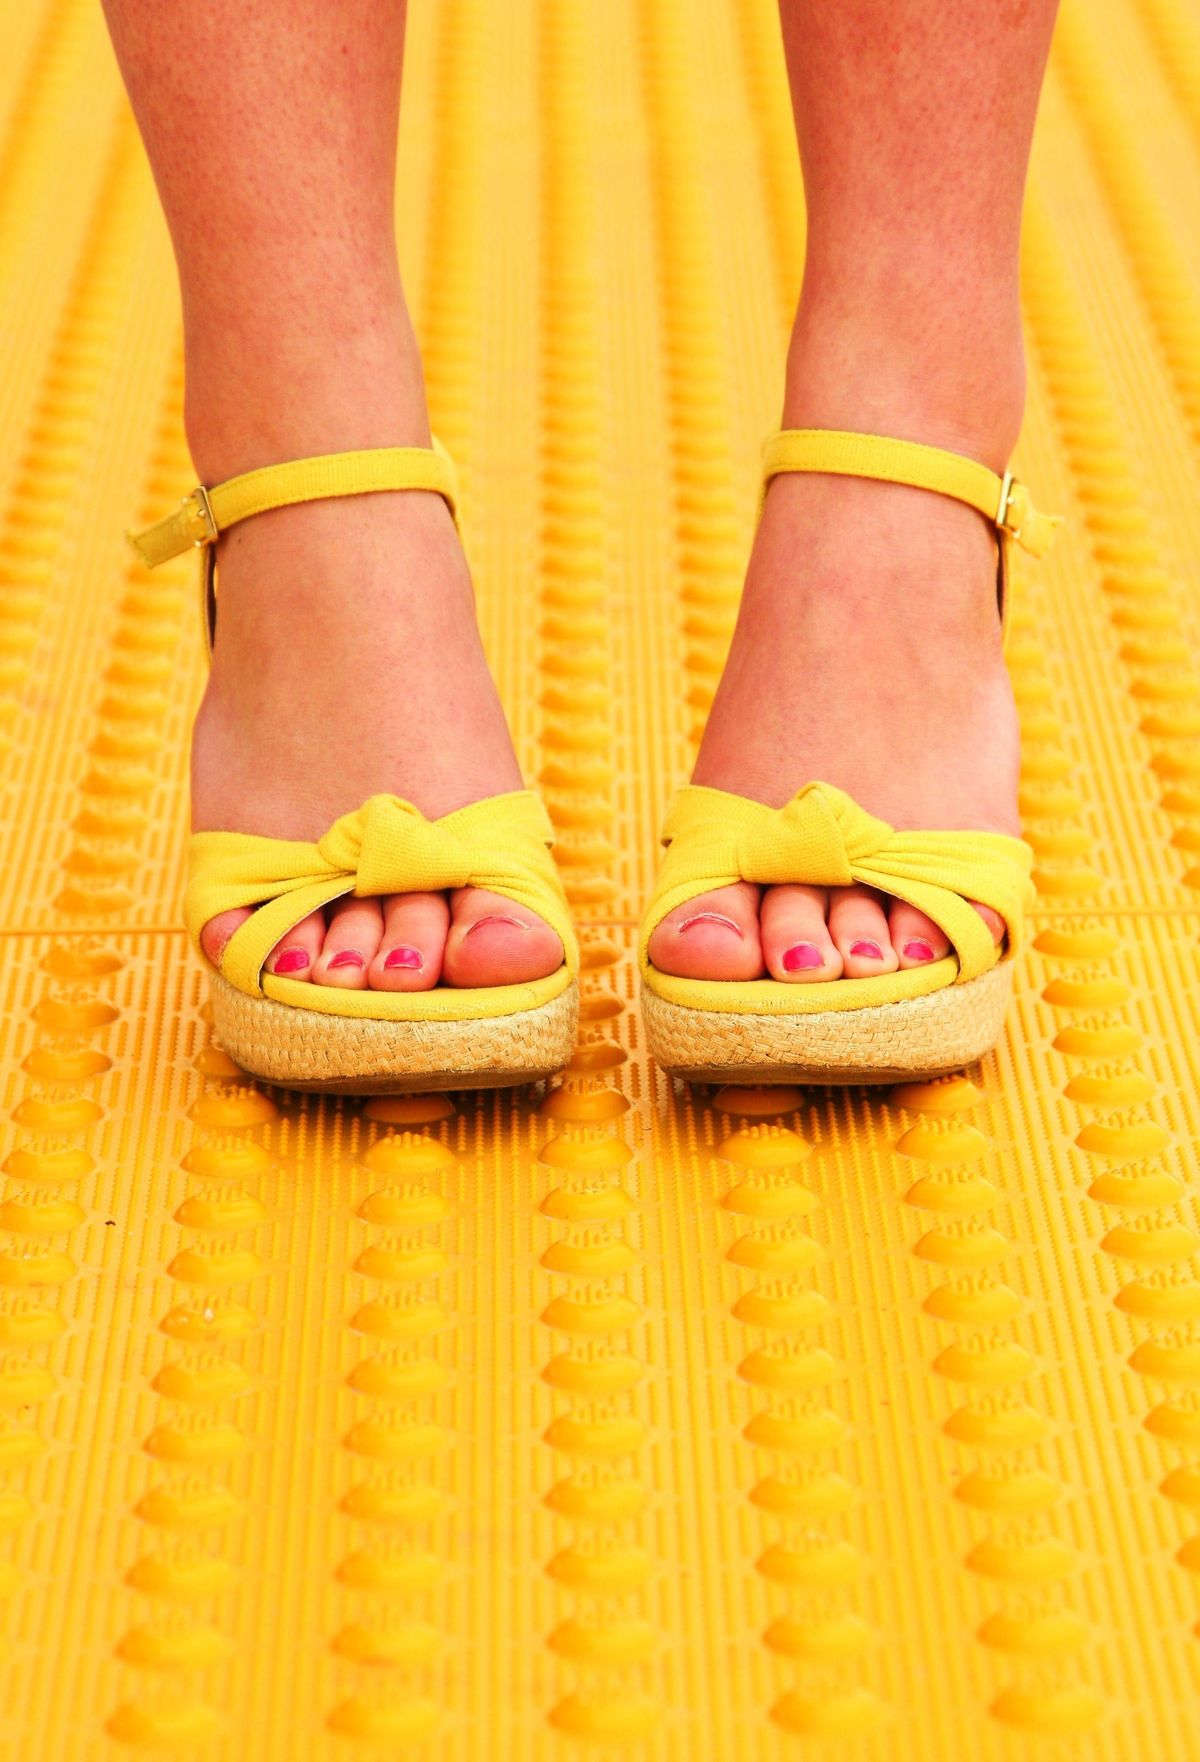 Get Sandal-Ready Feet with These Softening Foot Lotions